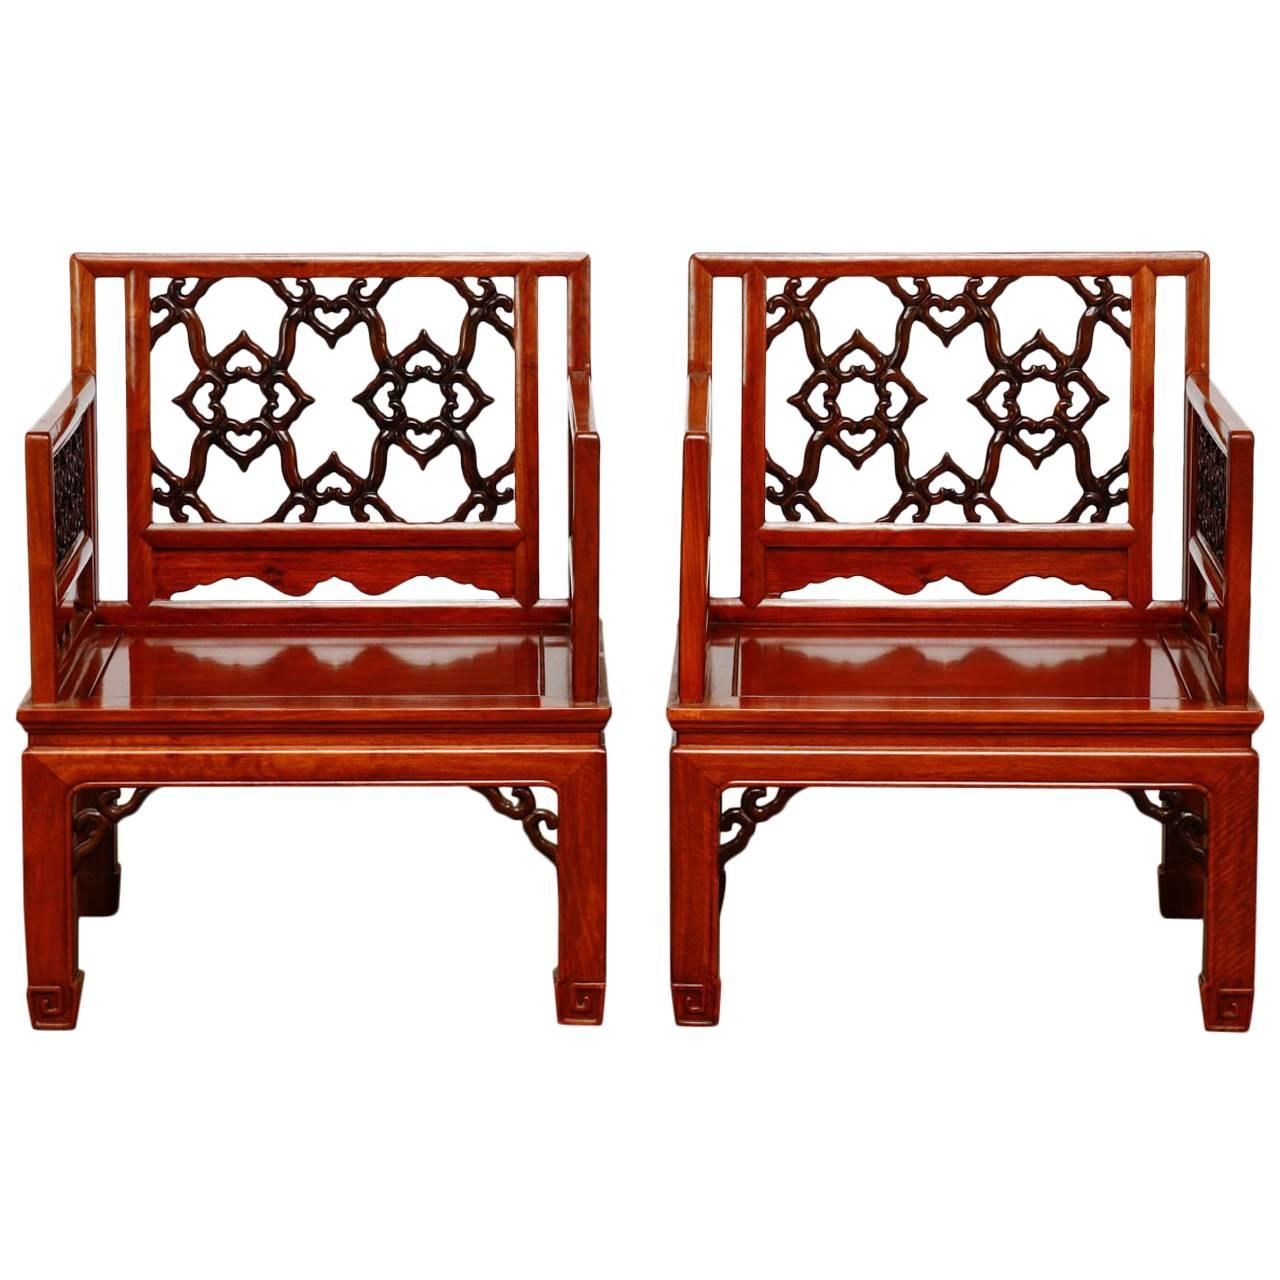 Pair of Chinese Carved Rosewood Lounge Chairs